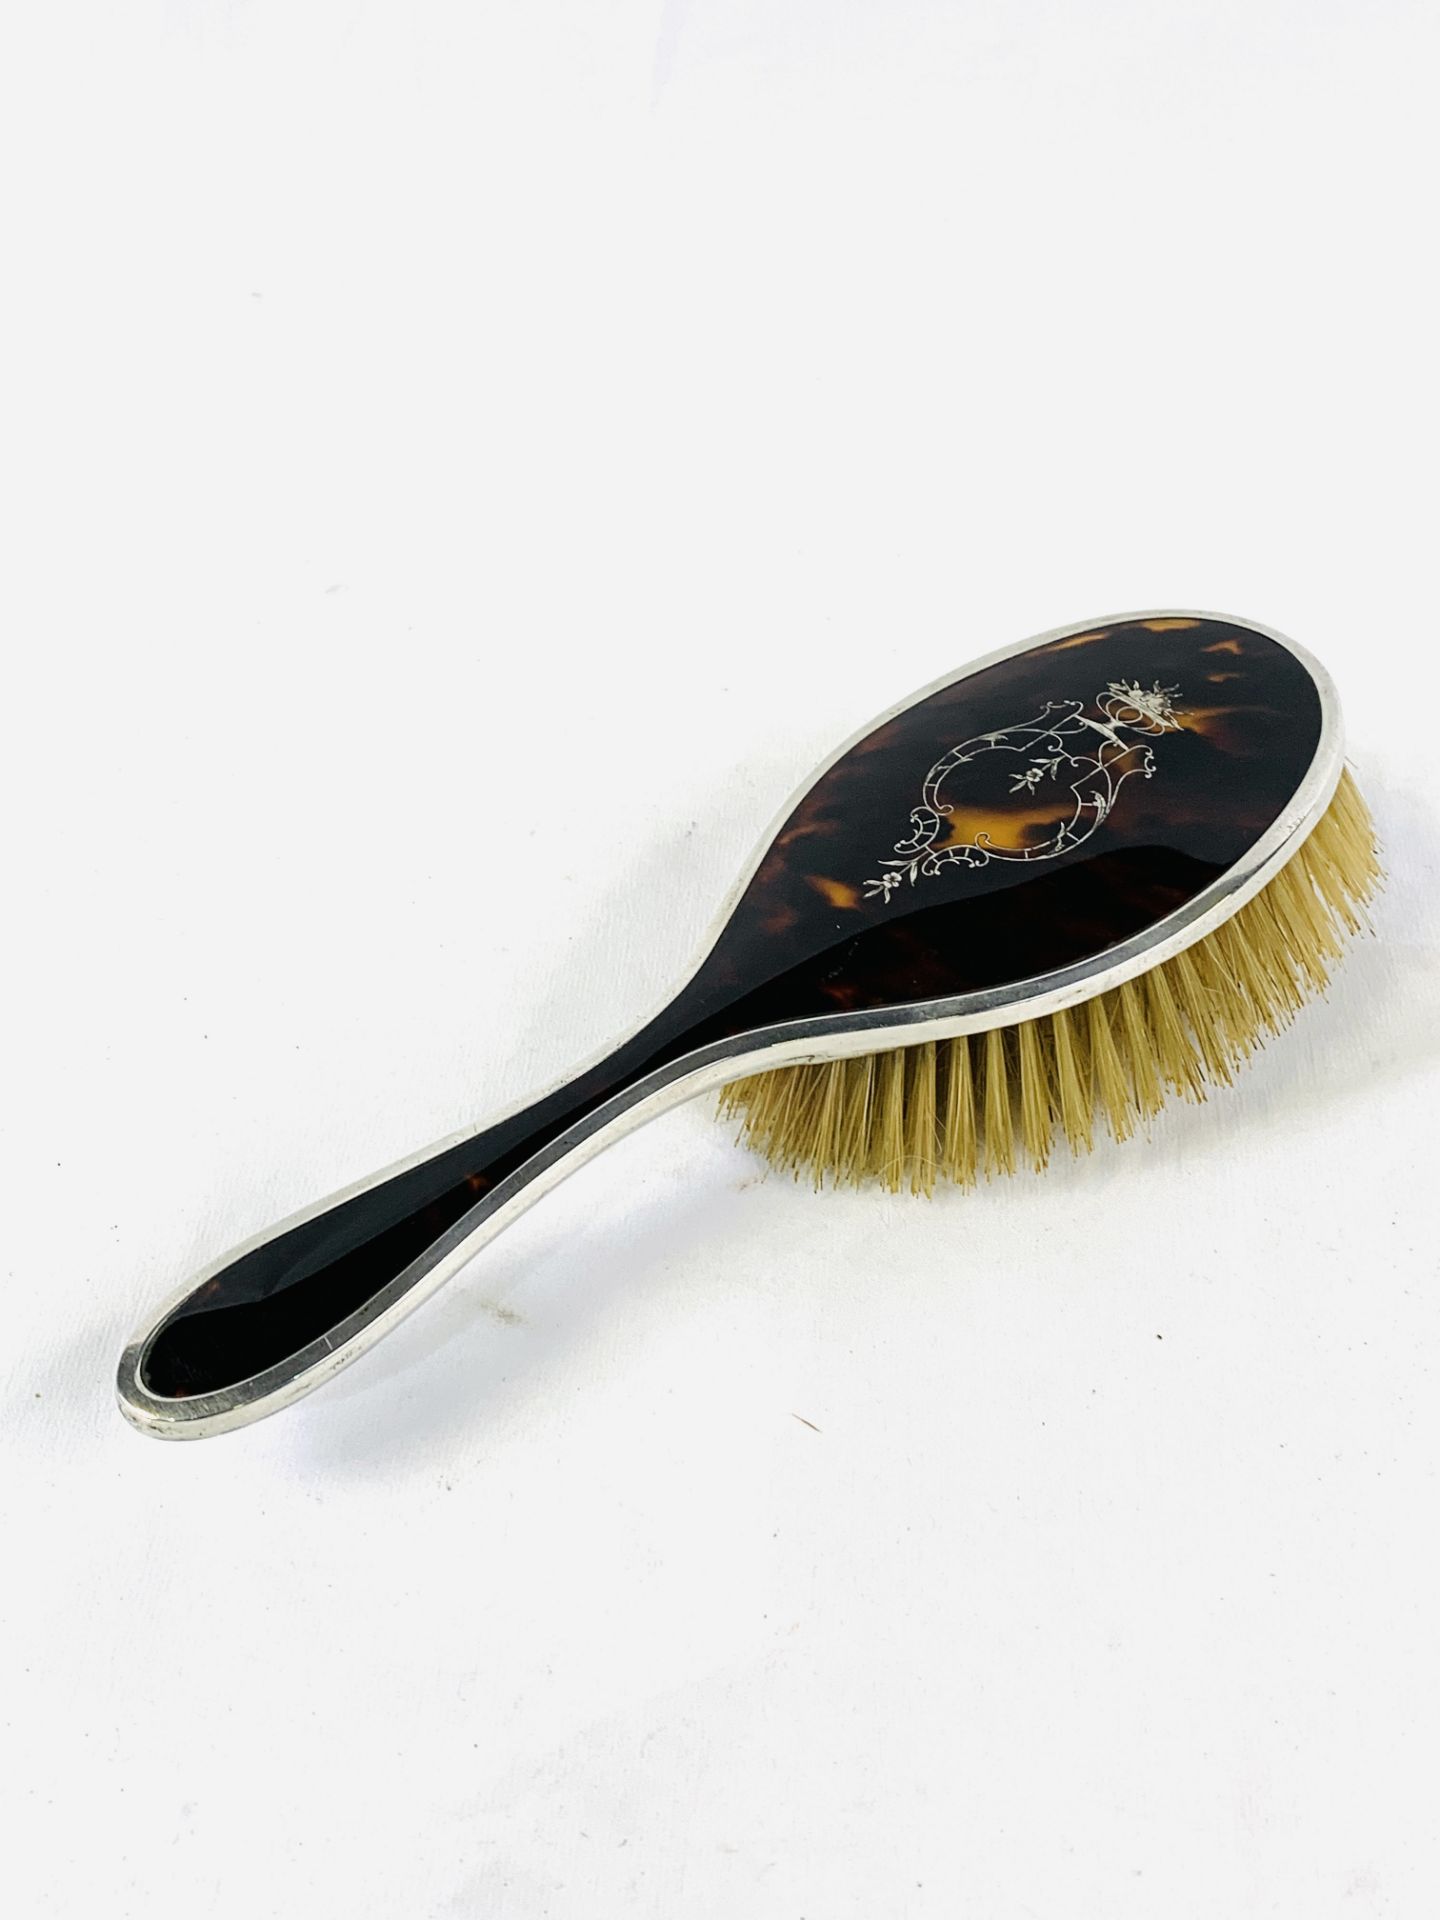 Edwardian tortoiseshell and hallmarked silver mounted and silver inlaid hairbrush - Image 4 of 4